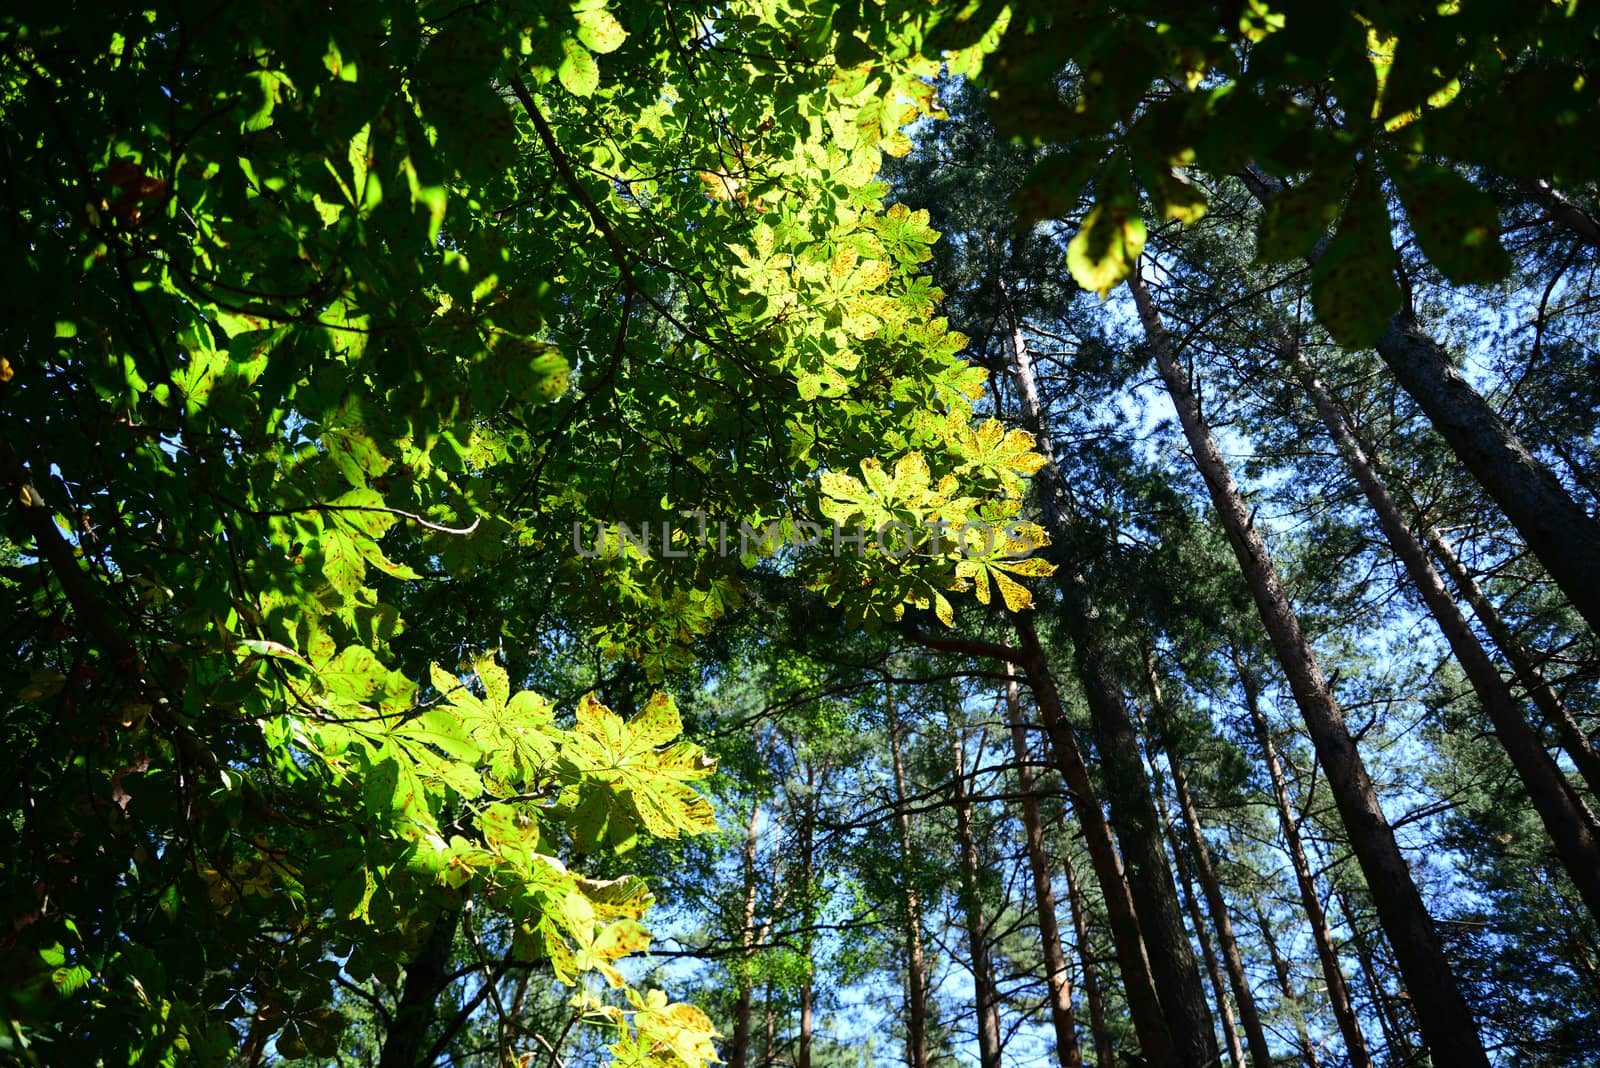 Photo of green leaves against a blue sky in a forest. Nature photography. Taken in Riga, Latvia.